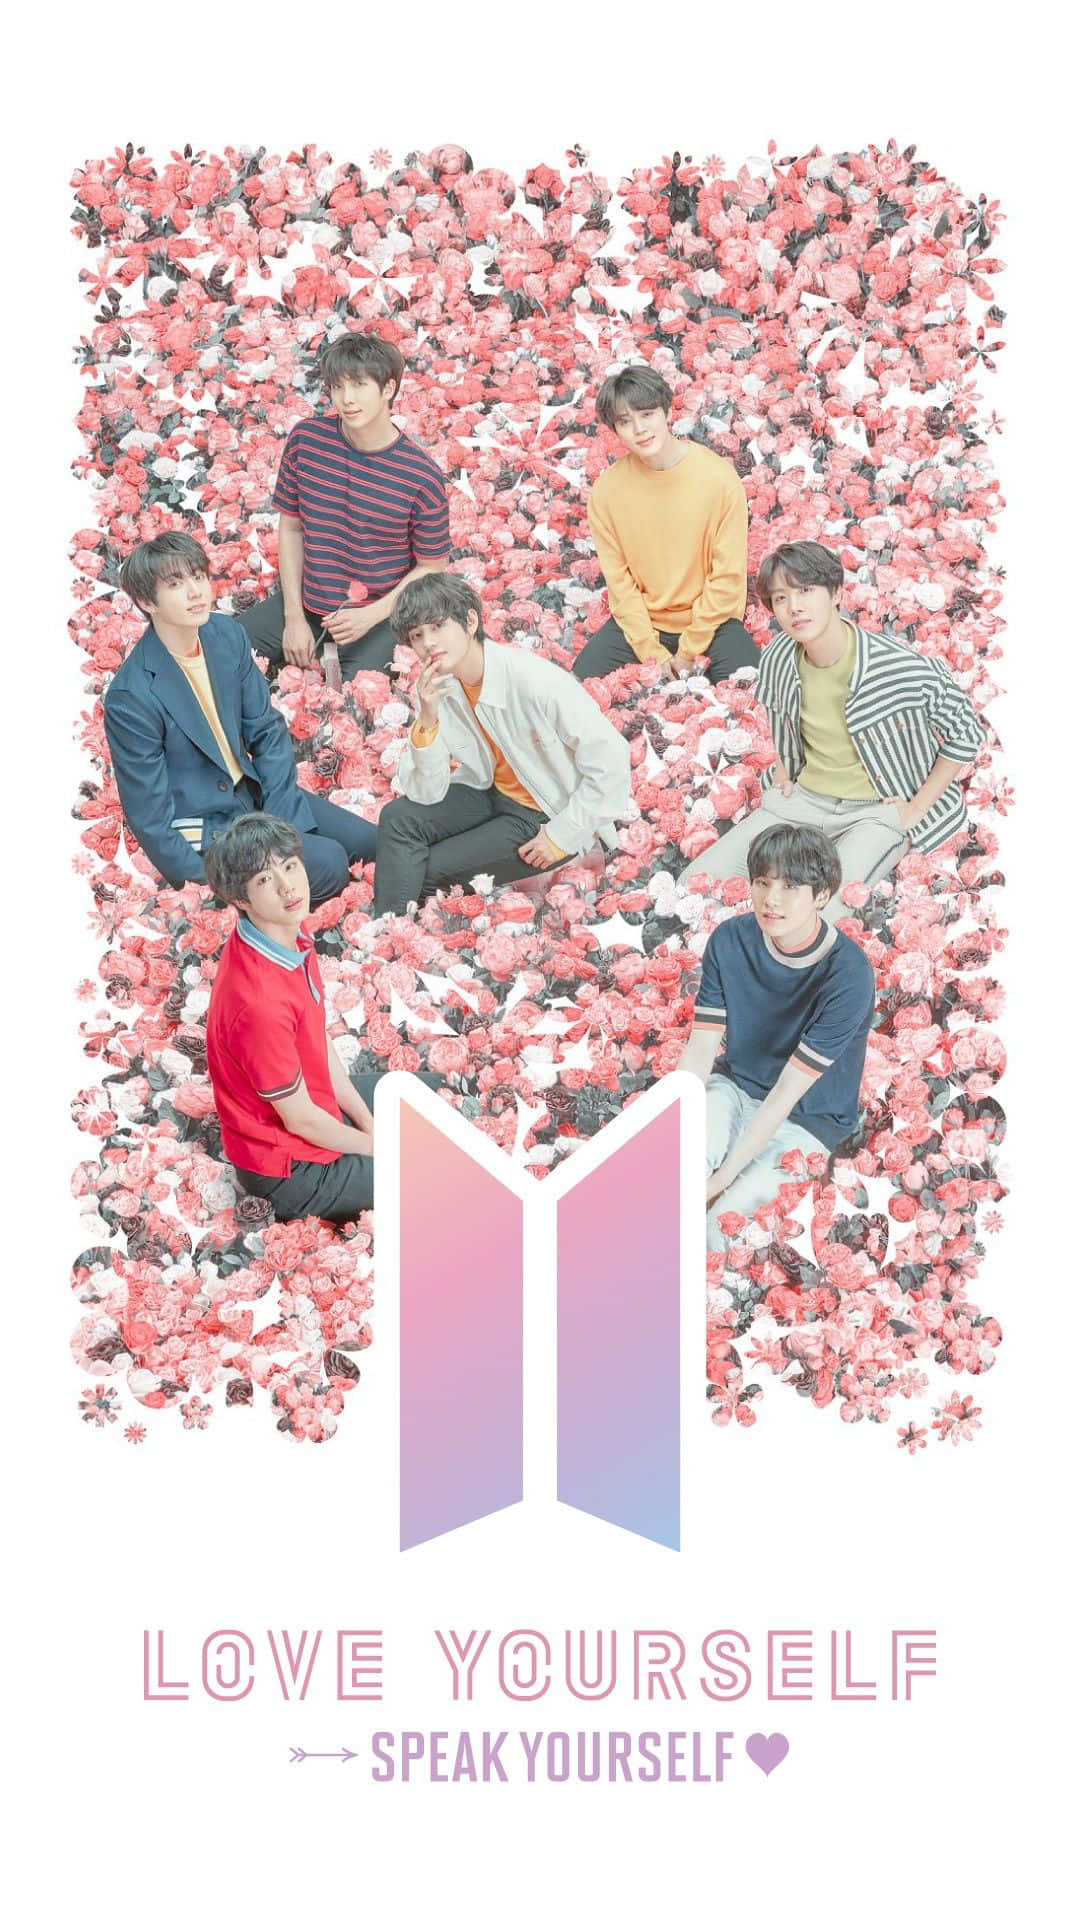 BTS Love Yourself - Inspiring Message of Self-Love and Acceptance Wallpaper